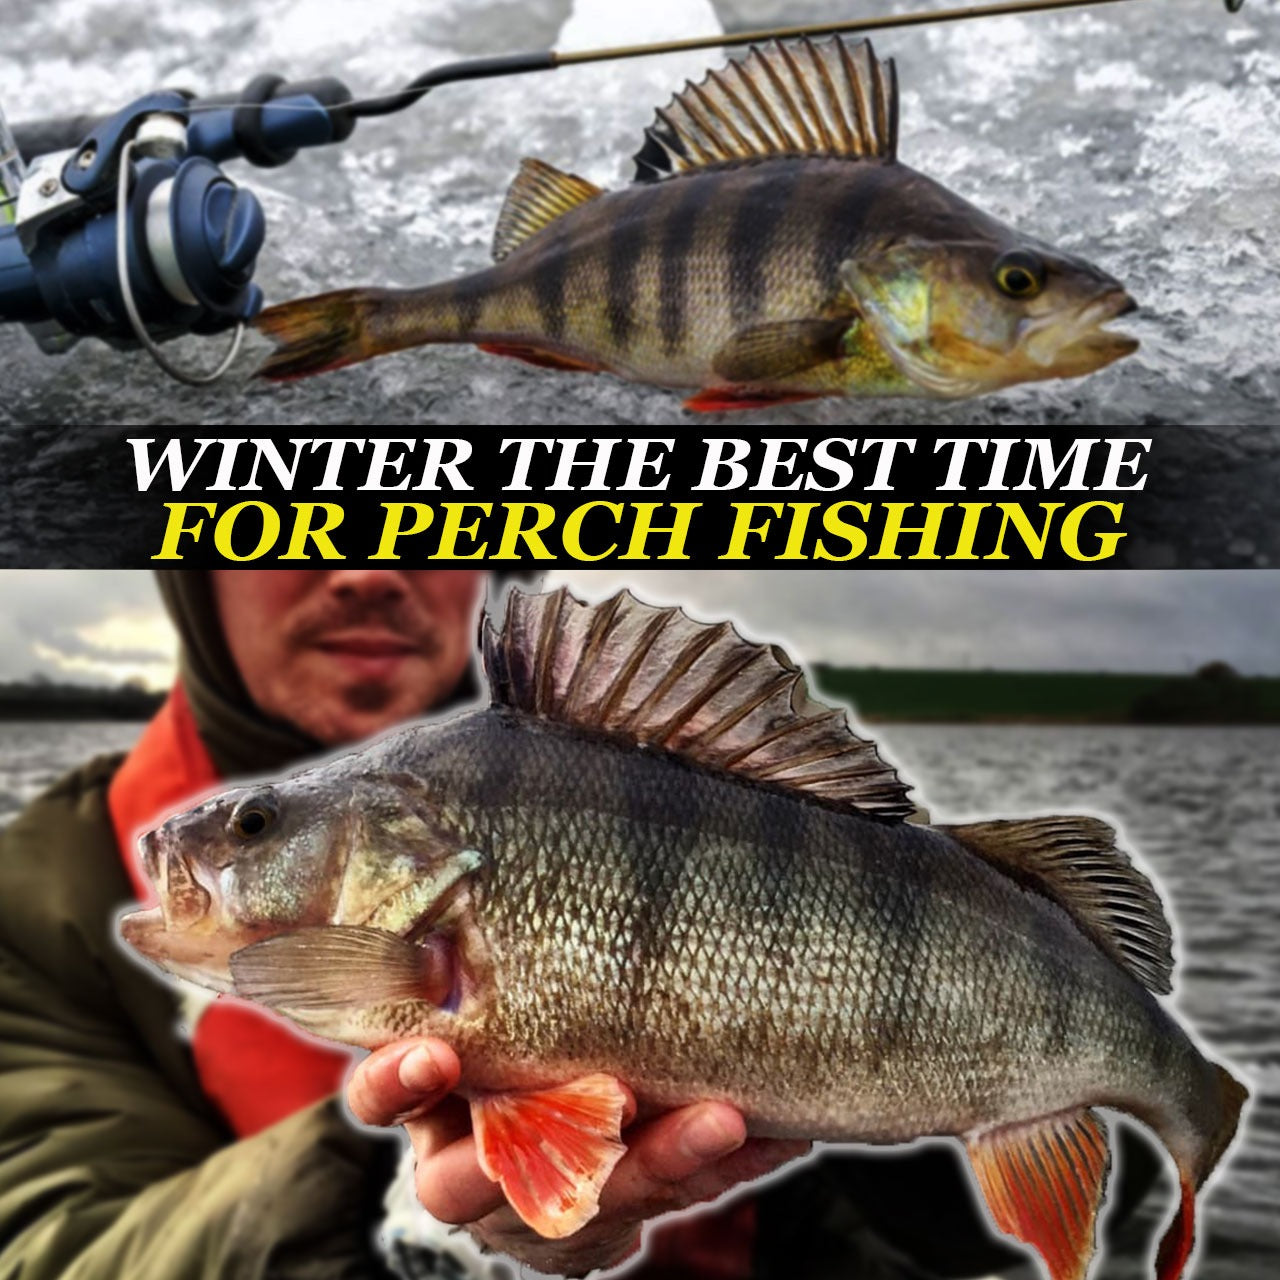 Winter The Best Time for Perch Fishing - Fishing Nice